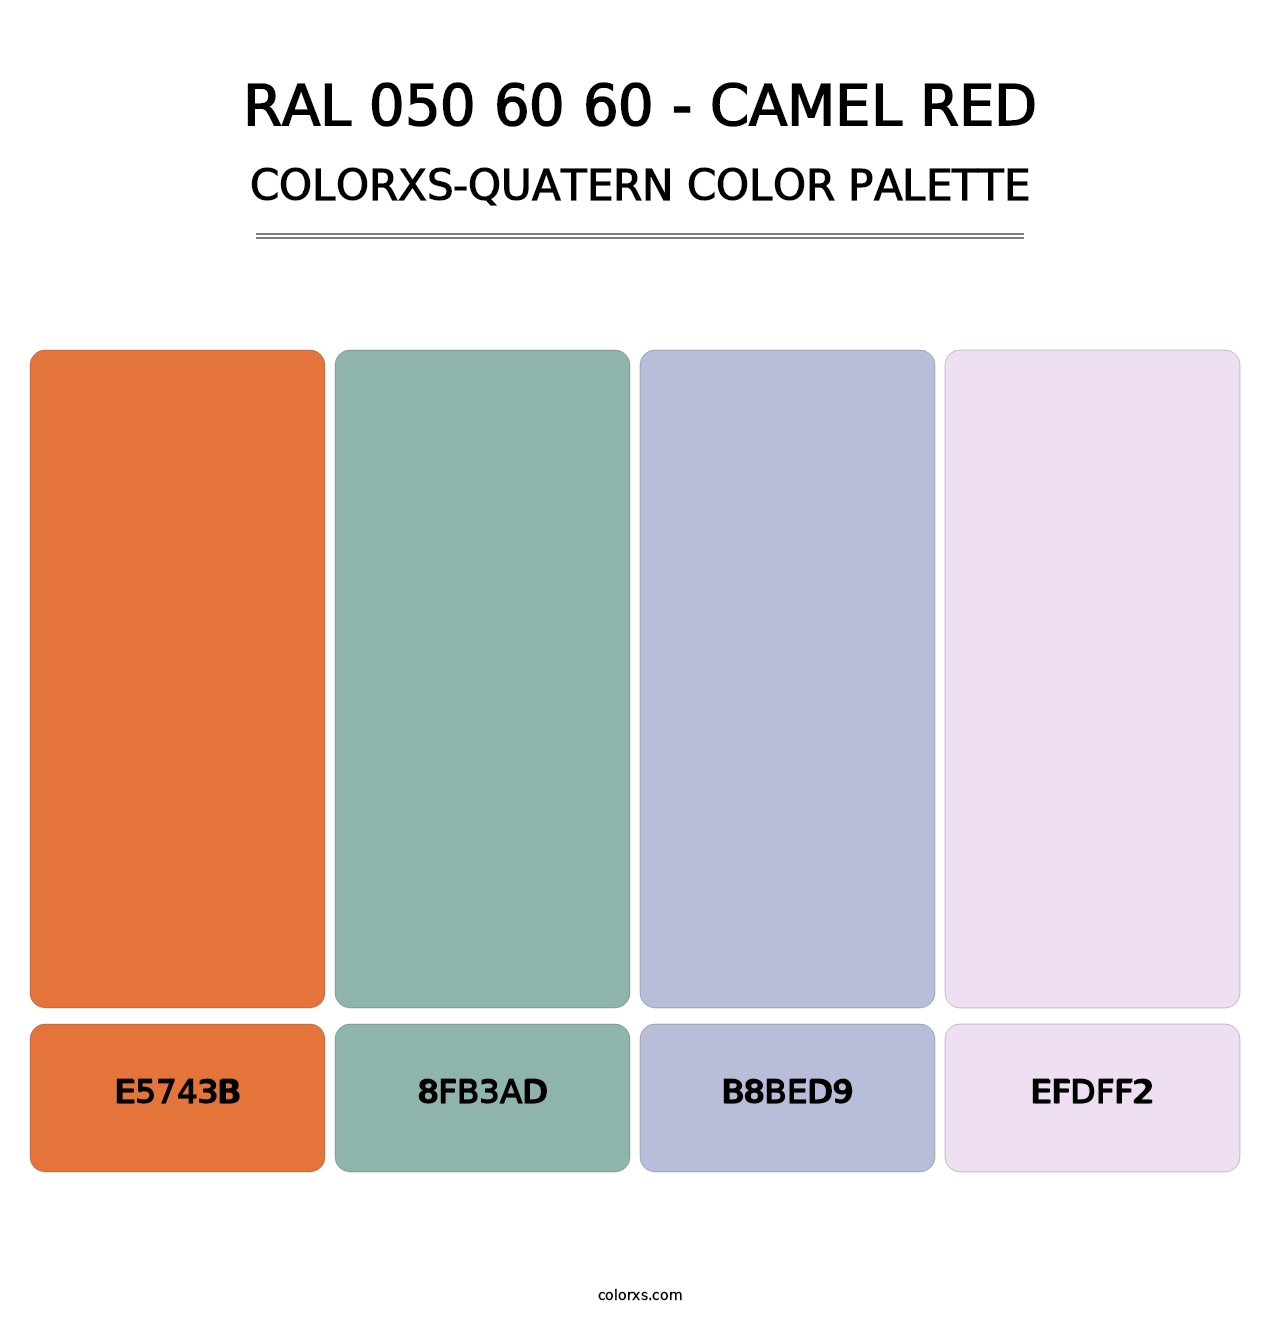 RAL 050 60 60 - Camel Red - Colorxs Quatern Palette